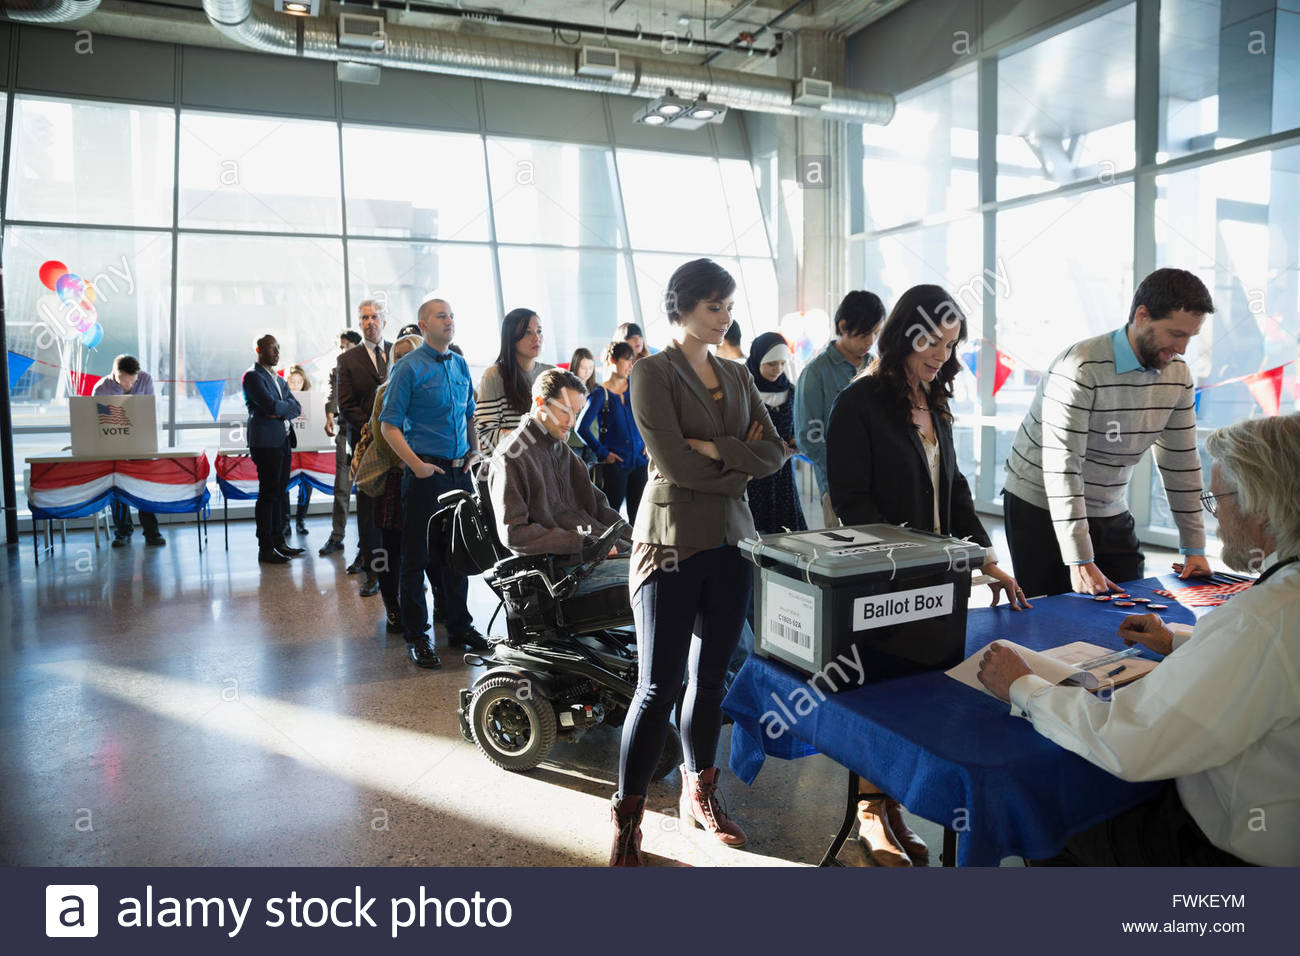 Voters waiting in line at polling place Stock Photo